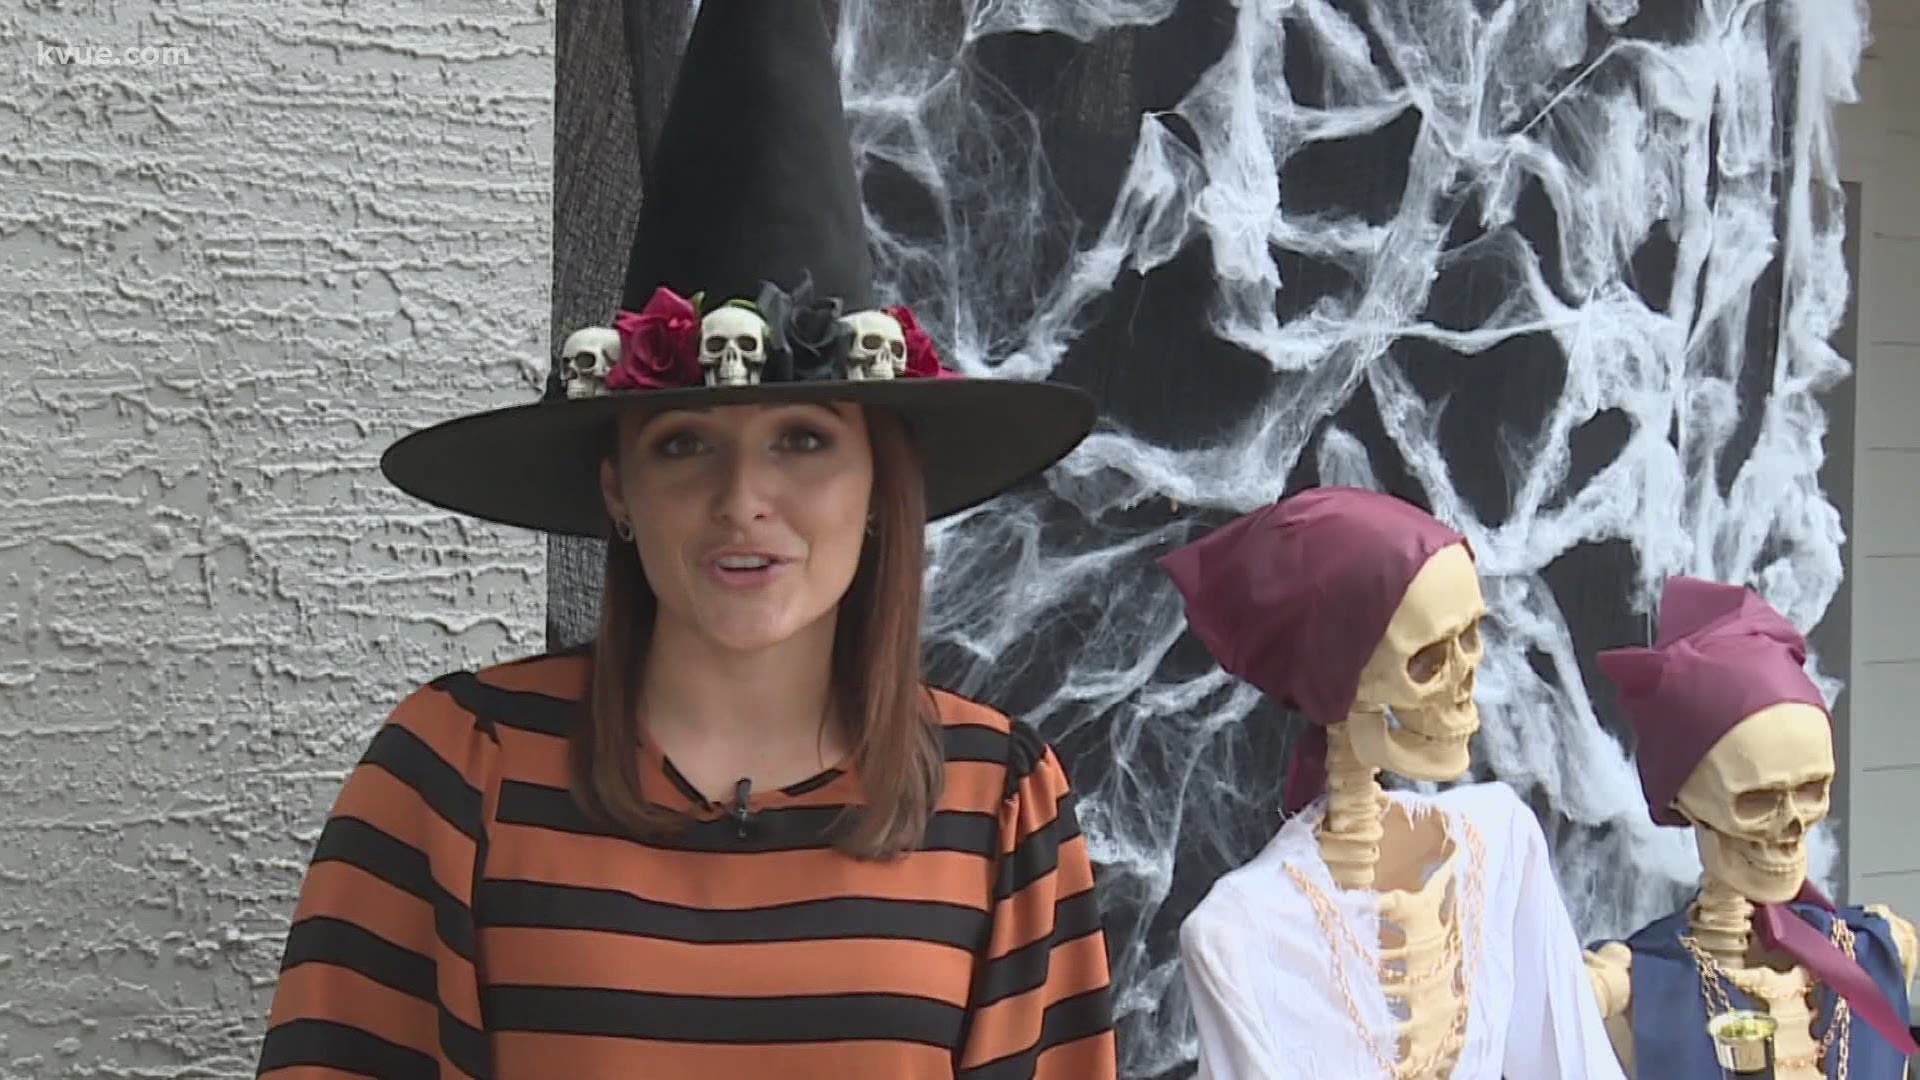 Halloween may look a little different this year due to the pandemic, but that doesn't mean it has to be canceled. KVUE's Brittany Flowers has some safety tips.